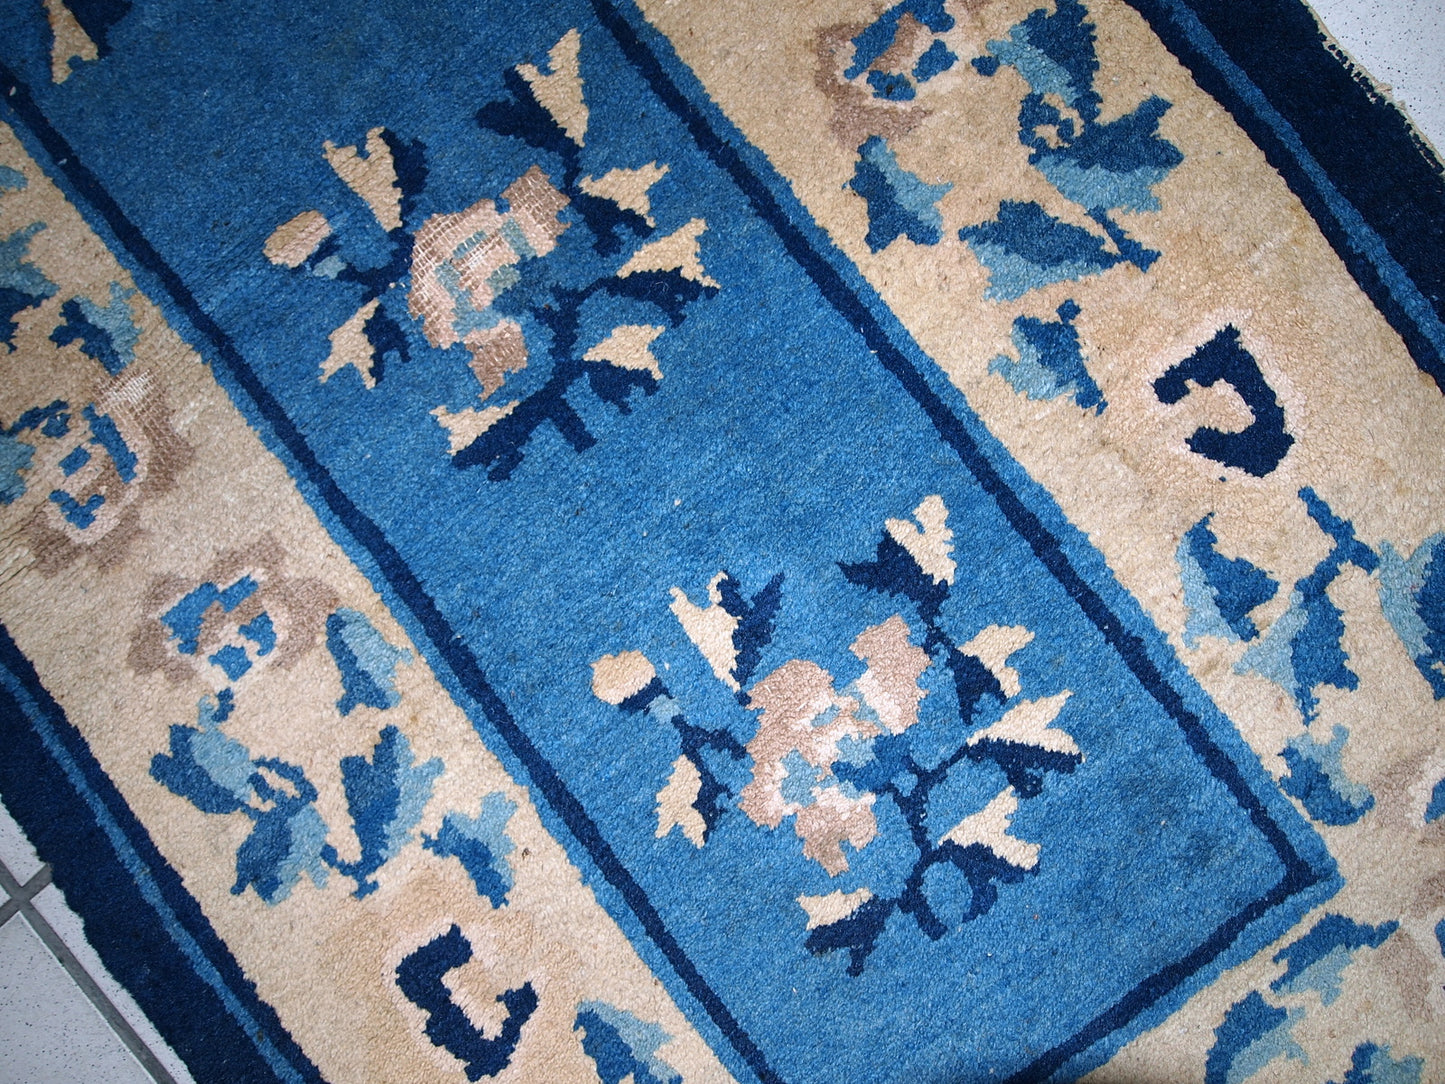 Detailed view of the beige elements in the rug's composition